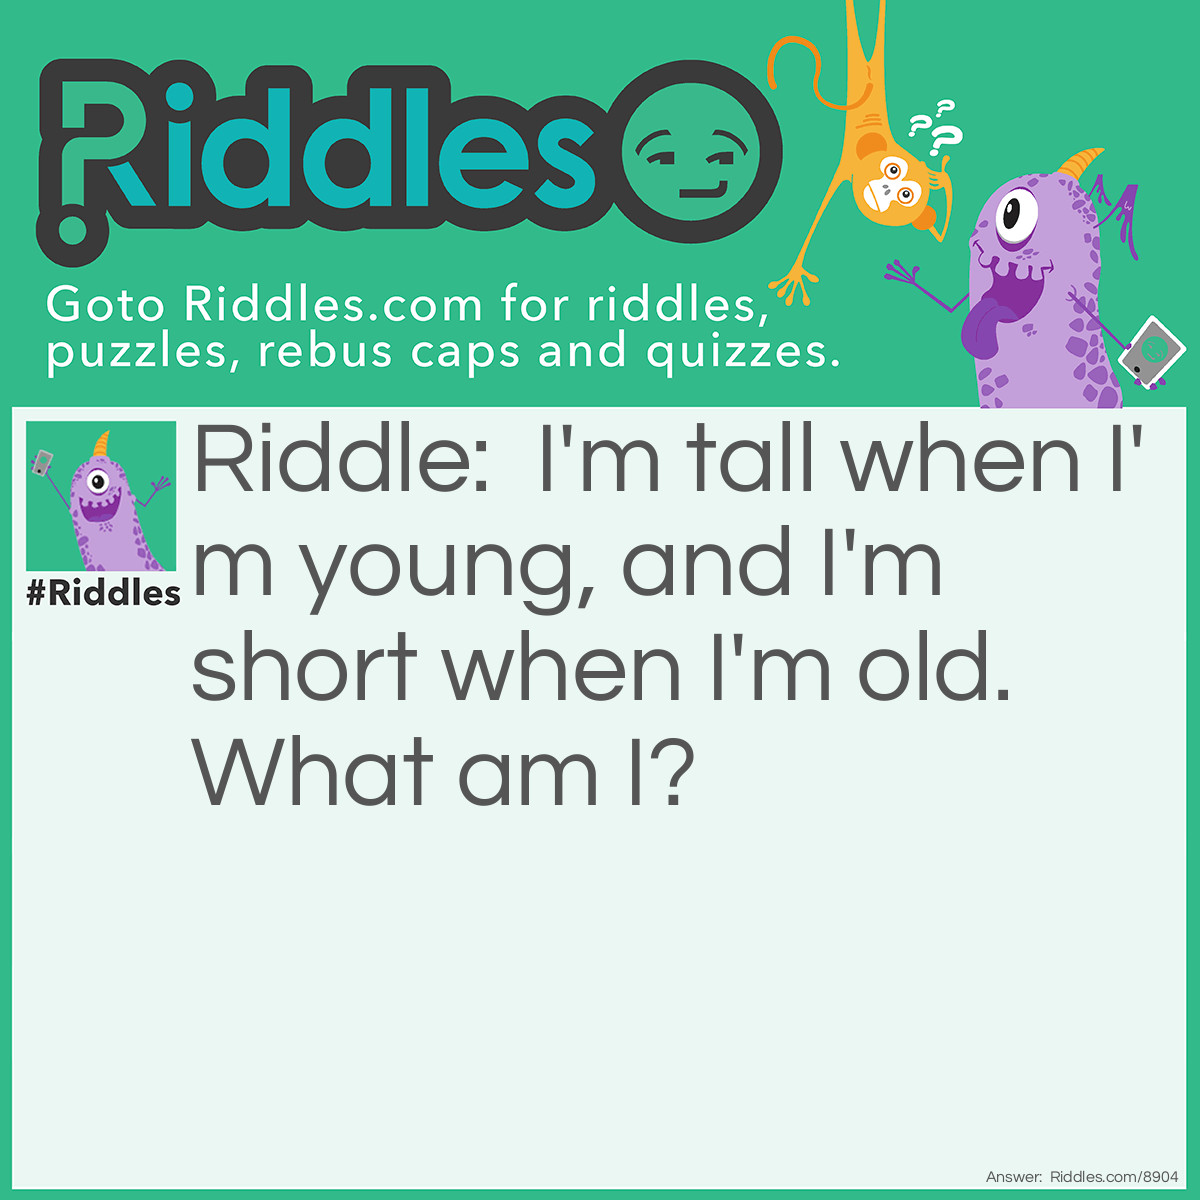 Riddle: I'm tall when I'm young, and I'm short when I'm old. What am I? Answer: A candle.